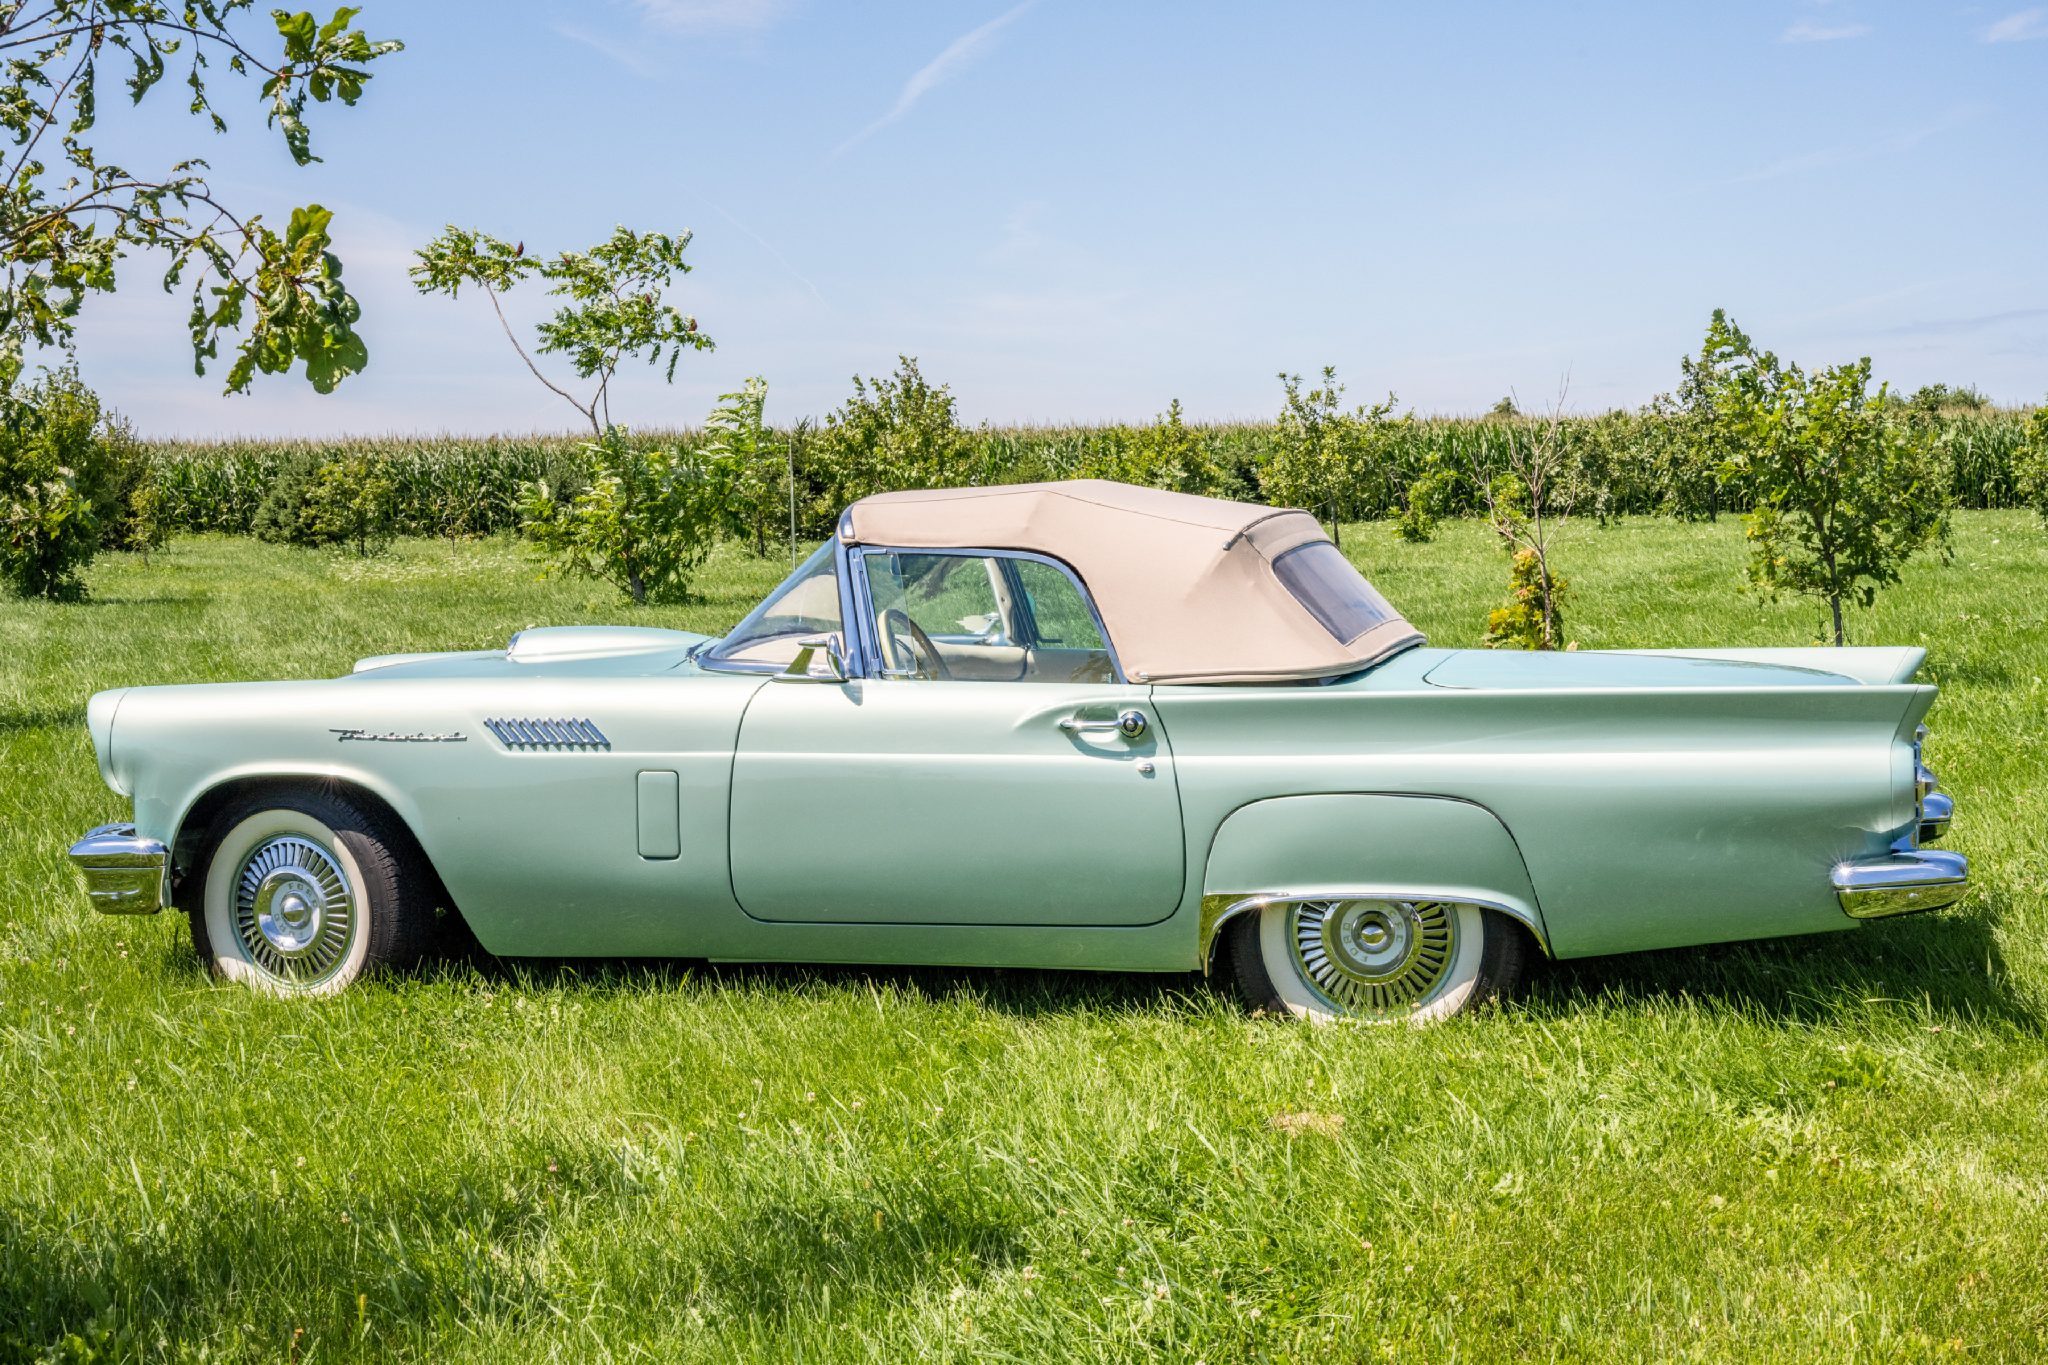 1957 Ford Thunderbird in a field